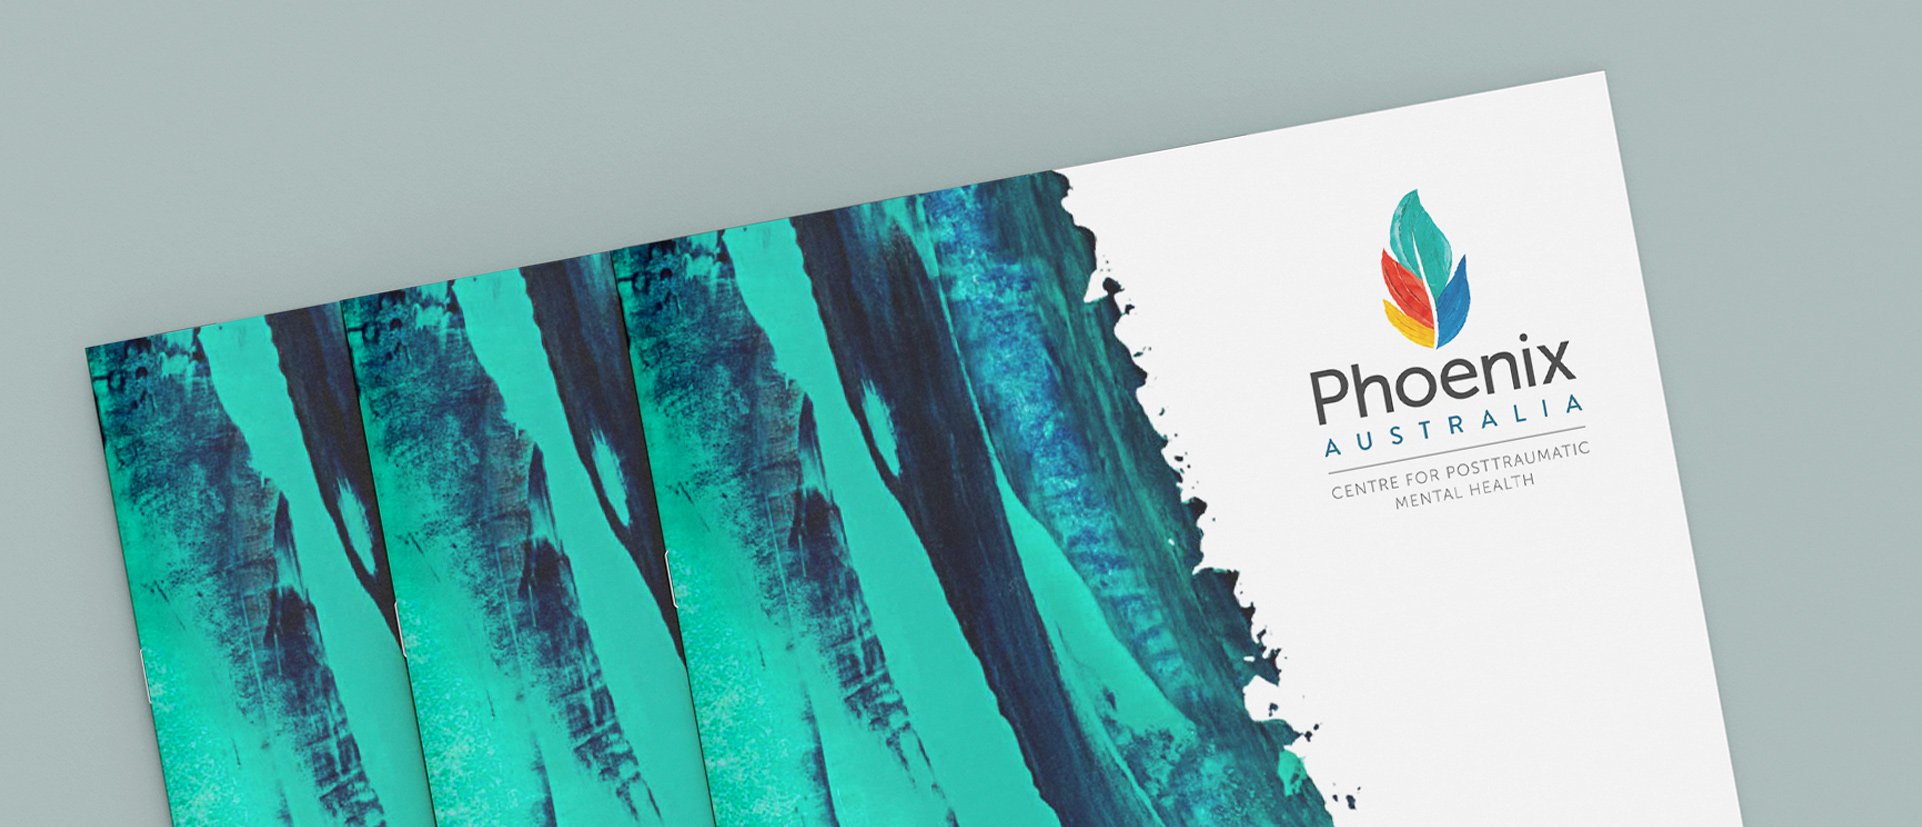 Cropped image of a Phoenix brochure showing the new brand